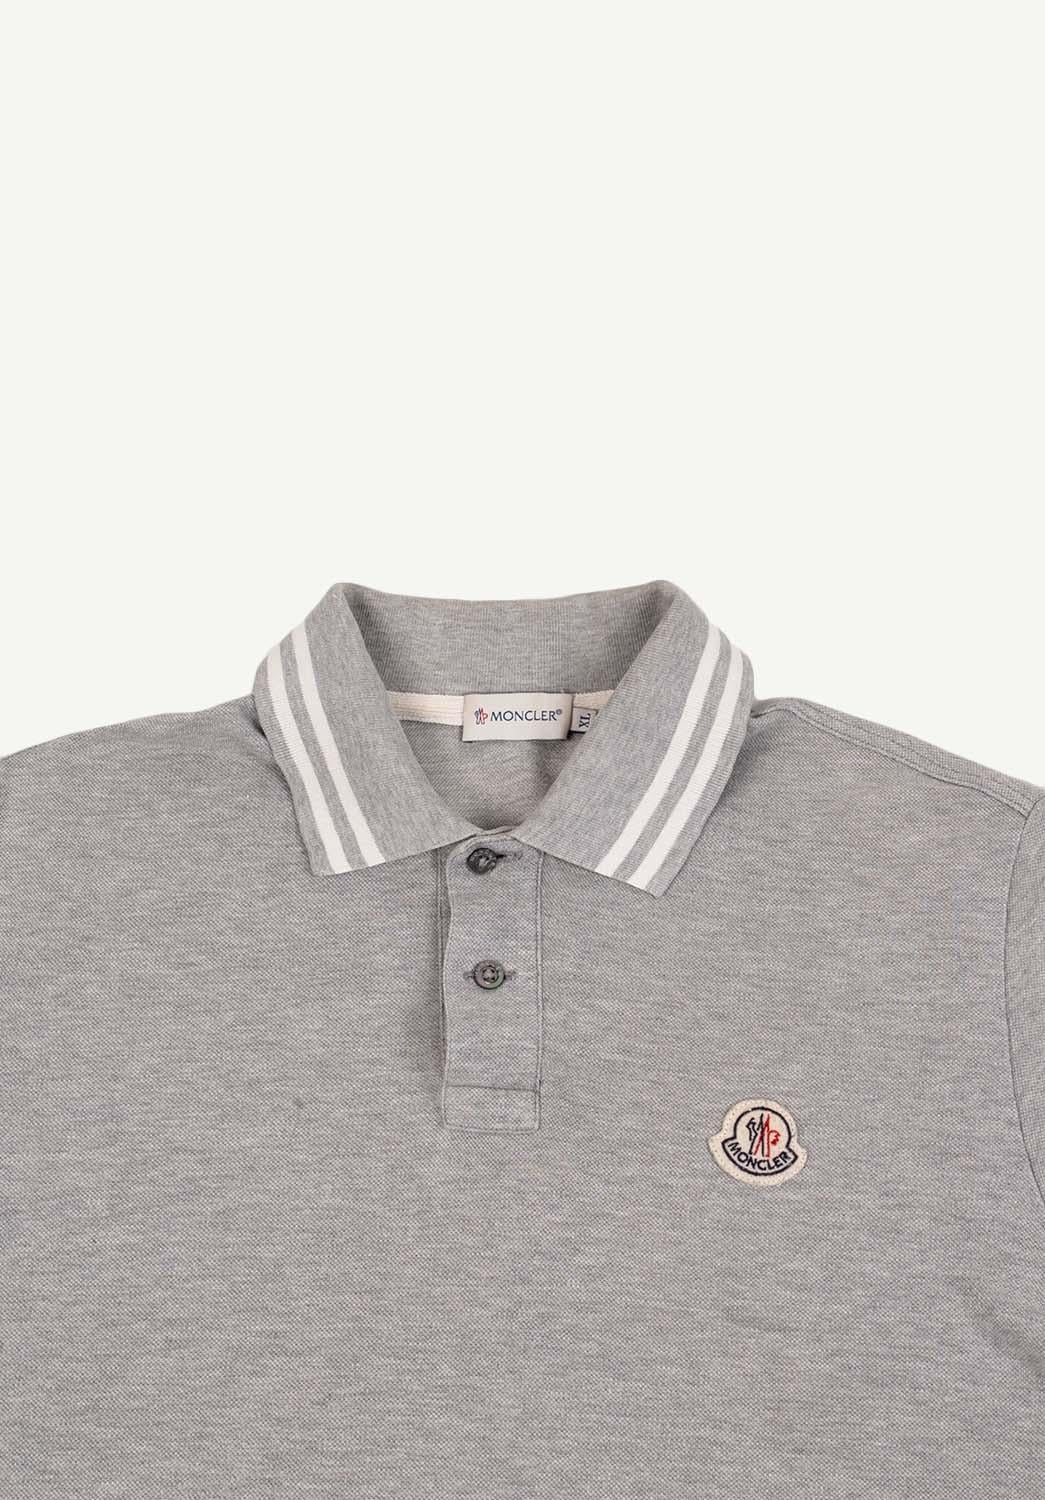 Item for sale is 100% genuine Moncler Polo Shirt Men T-Shirt 
Color: Grey
(An actual color may a bit vary due to individual computer screen interpretation)
Material: Cotton, missing care label. 
Tag size: XL runs smaller like M/L
This t shirt is